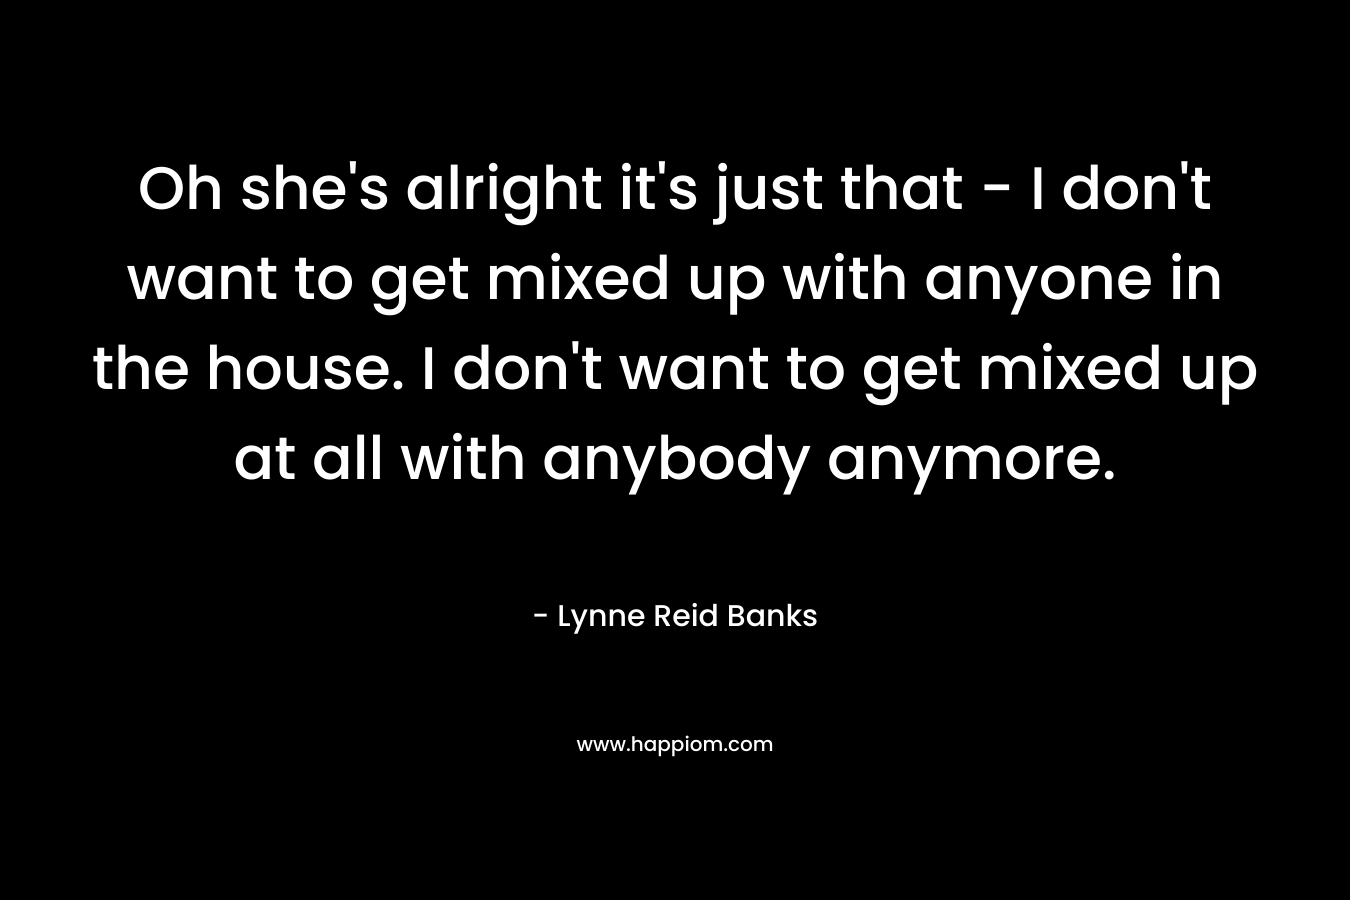 Oh she’s alright it’s just that – I don’t want to get mixed up with anyone in the house. I don’t want to get mixed up at all with anybody anymore. – Lynne Reid Banks